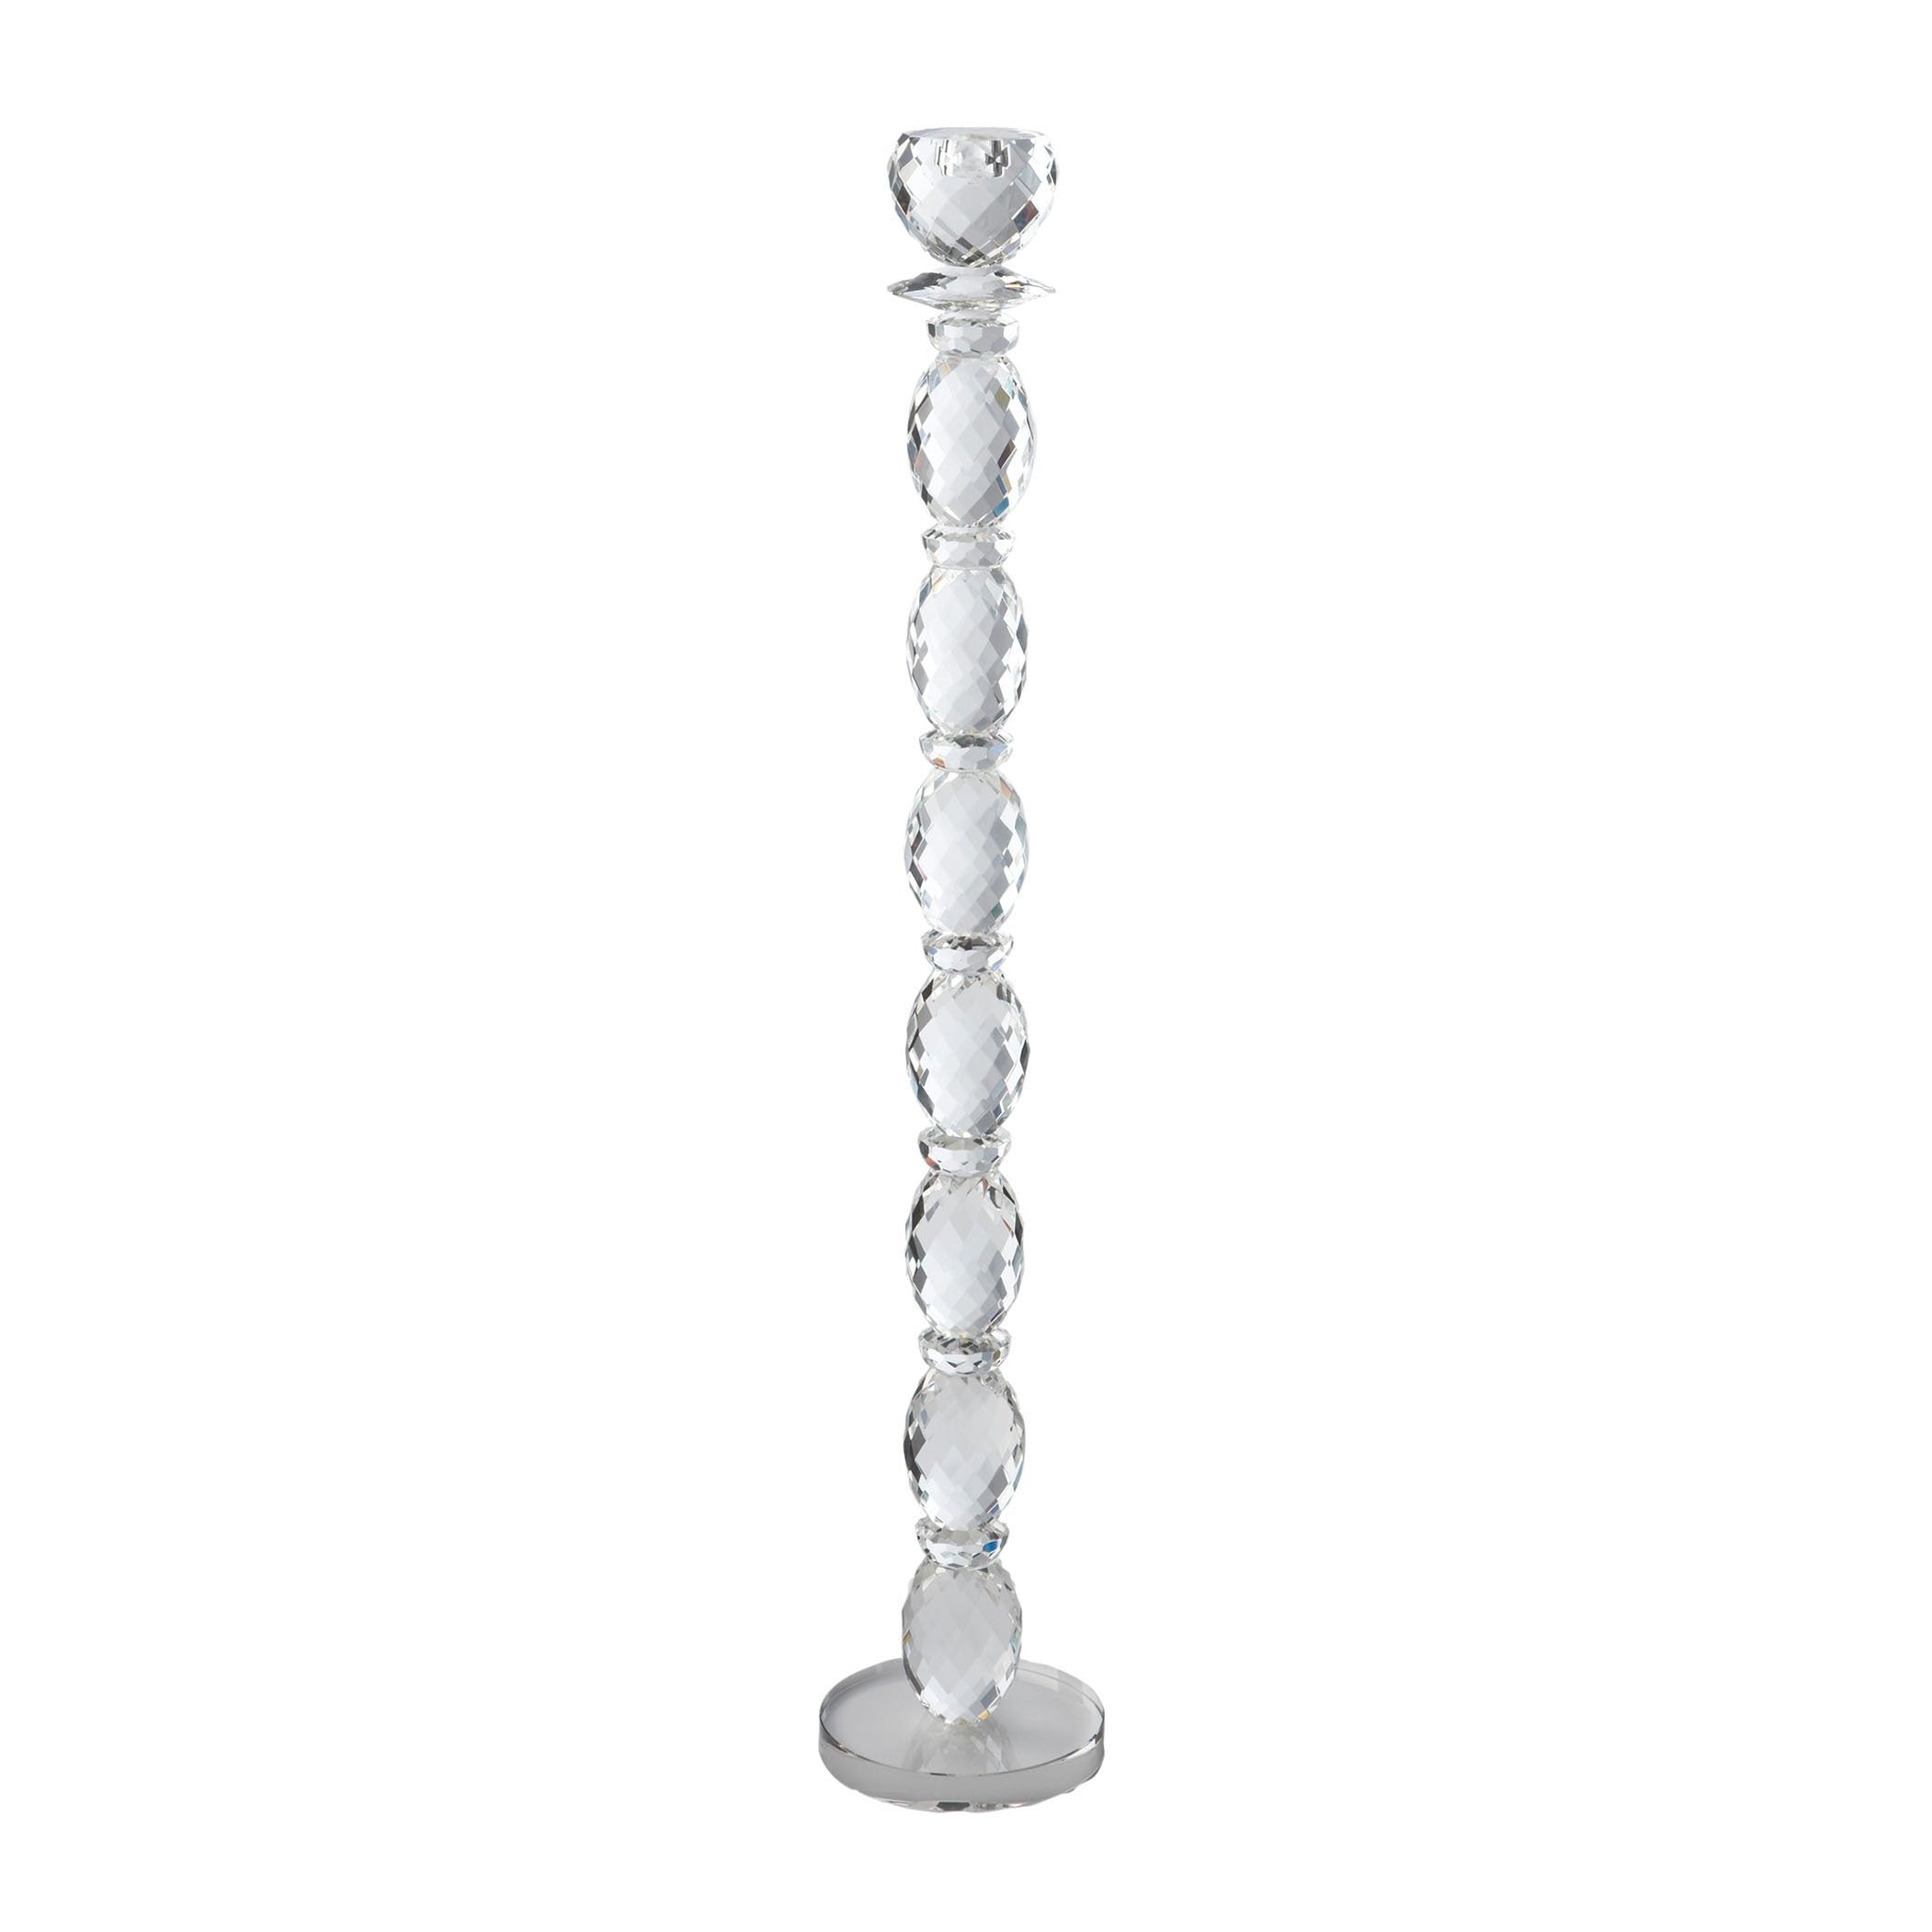 Harlow Crystal Candleholder - Large Accessories Dimond Home 